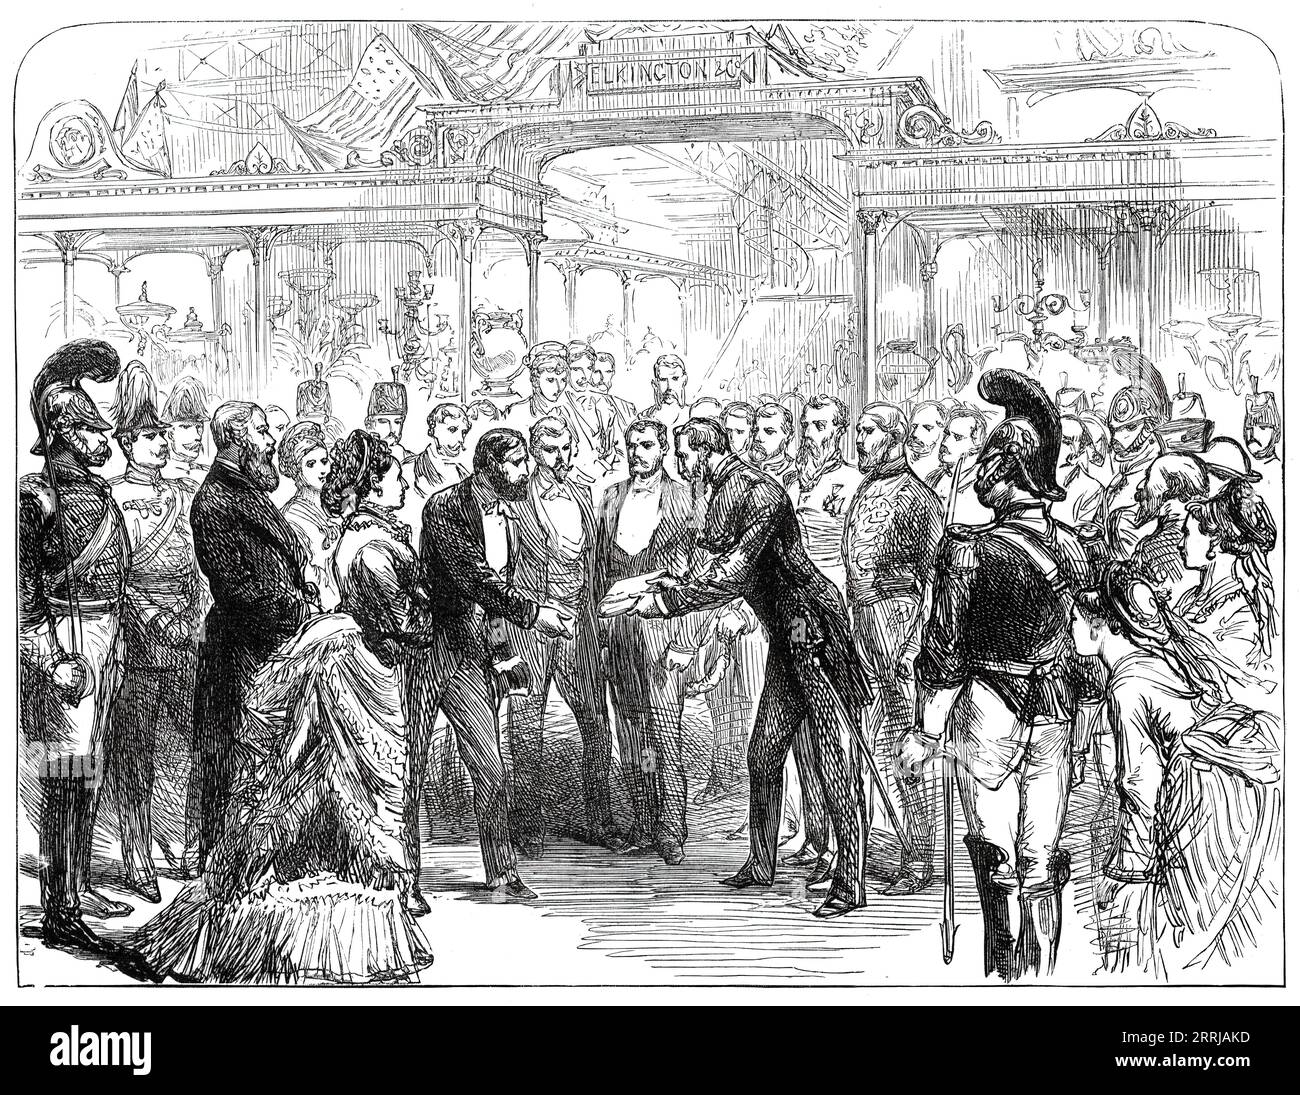 Opening of the American Centennial Exhibition: Colonel Sandford delivering to President Grant a Catalogue of the British Department, from a sketch by our special artist, 1876. 'Colonel Sandford appears in his military uniform, handing the volume over to [the President]: the British Minister at Washington, Sir Edward Thornton, likewise in uniform, stands behind Colonel Sandford. The Emperor and Empress of Brazil are in the left-hand foreground'. From &quot;Illustrated London News&quot;, 1876. Stock Photo